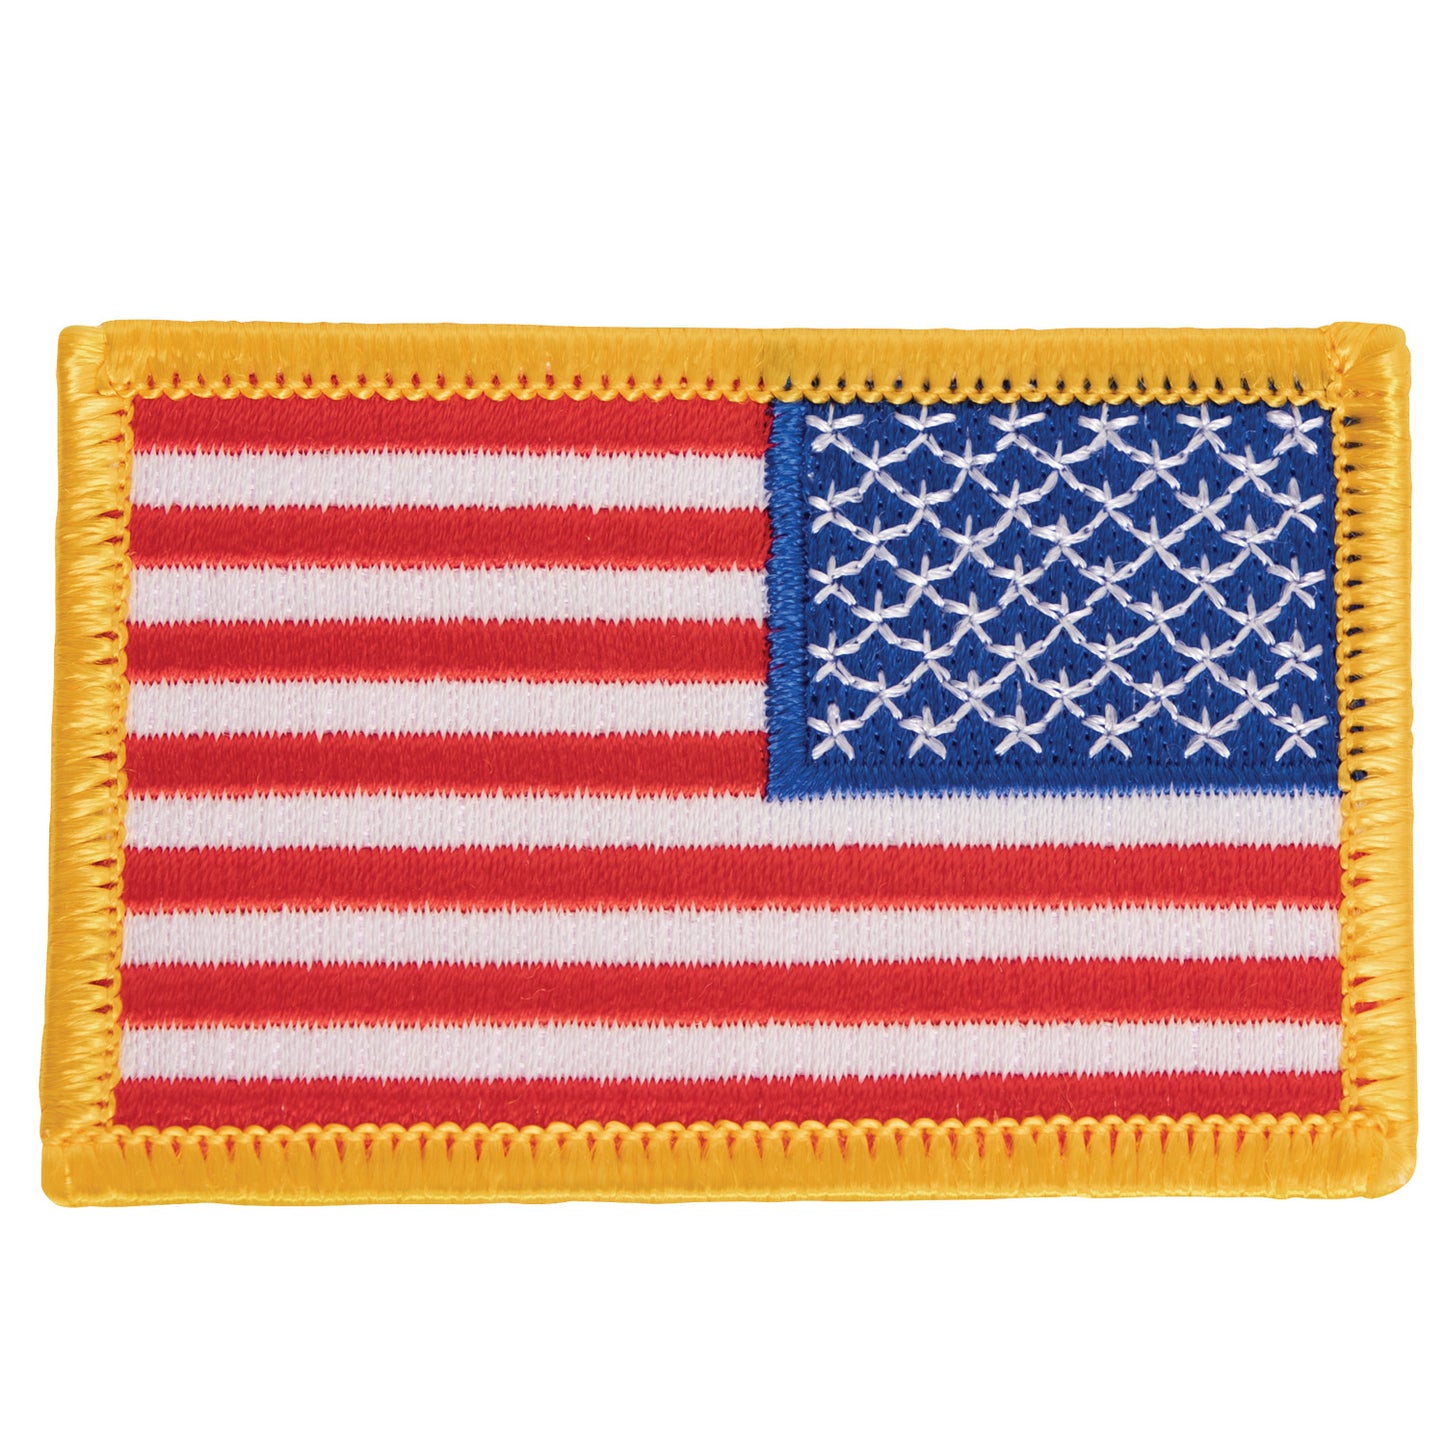 Rothco Iron On / Sew On Embroidered US Flag Patch